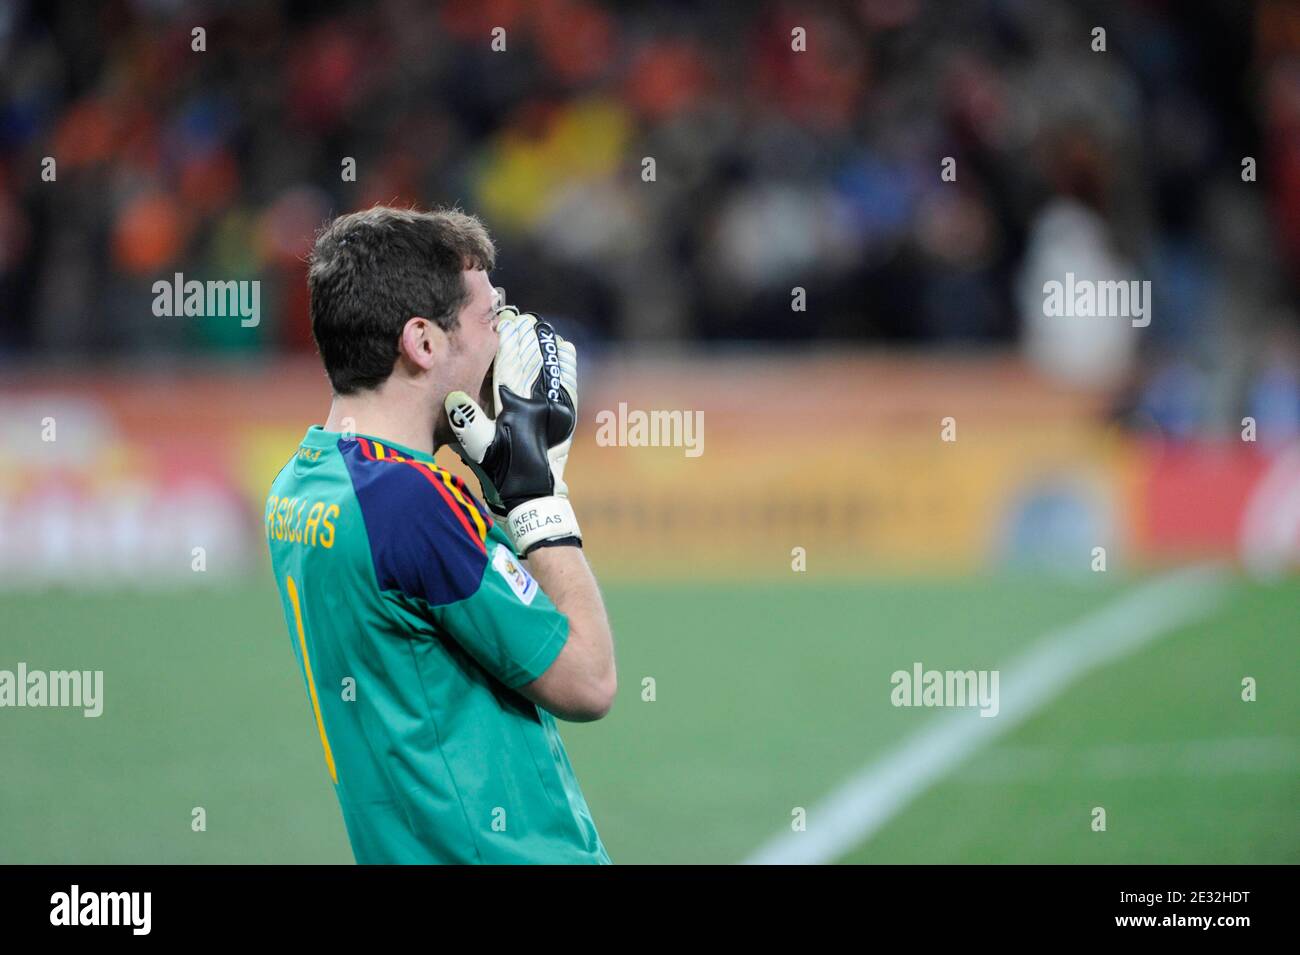 Joy of Spain's Iker Casillas after Andres Iniesta scored the 1-0 goal in the 2010 FIFA World Cup South Africa Final Soccer match, Spain vs Netherlands at Soccer City football stadium in Johannesburg, South Africa on July 11th, 2010. Spain won 1-0. Photo by Henri Szwarc/ABACAPRESS.COM Stock Photo